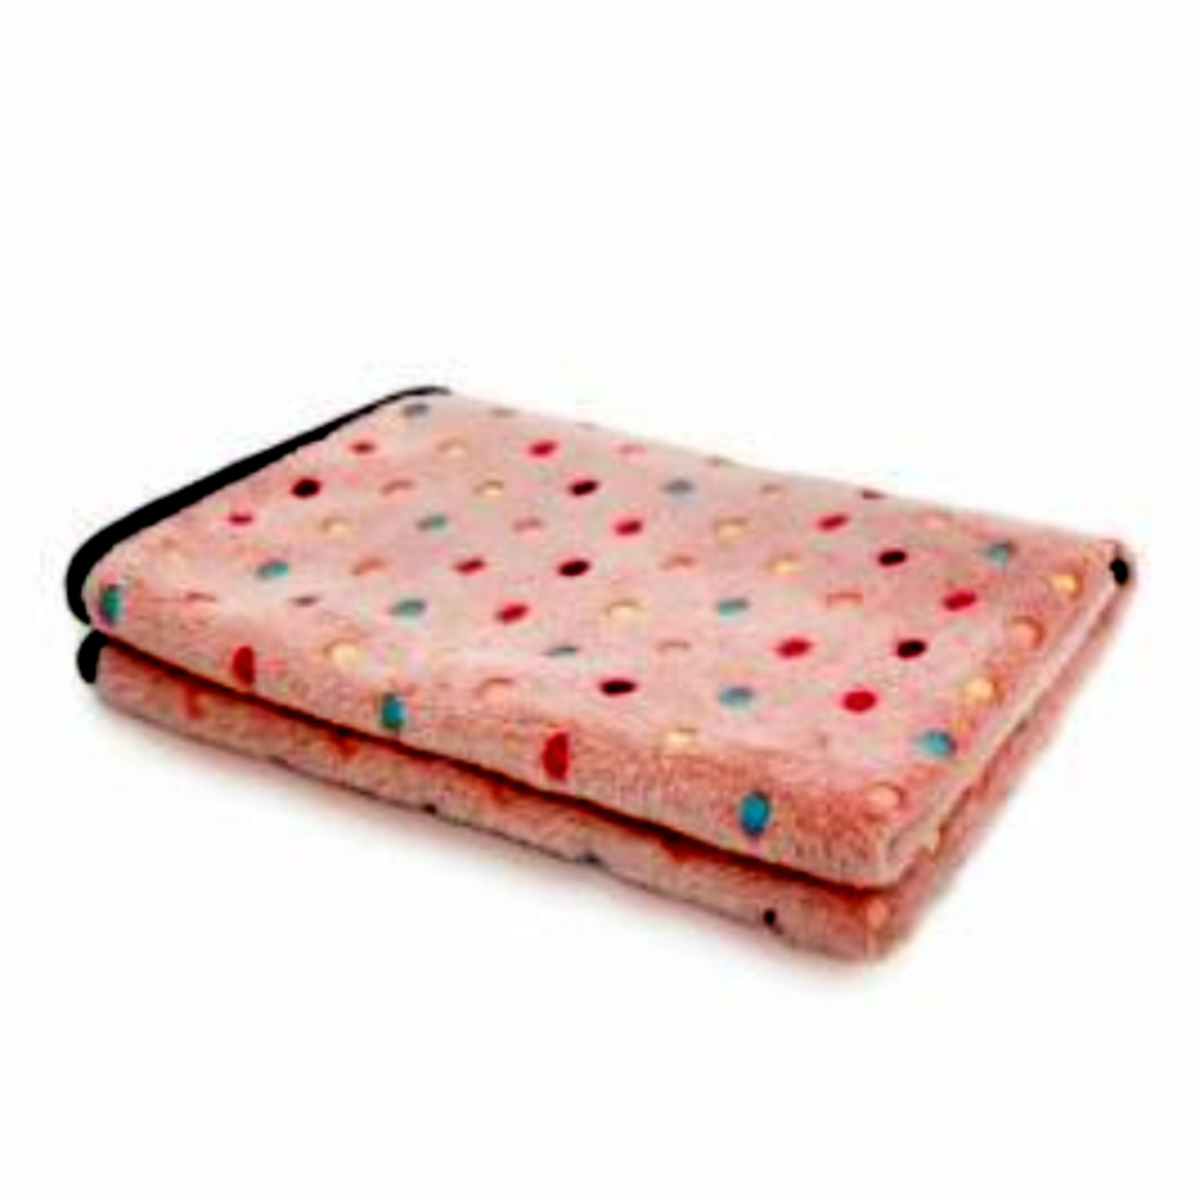 PAWZ Road Pet Cat/Dog Blanket Fleece Fabric Soft - Available in 4 sizes